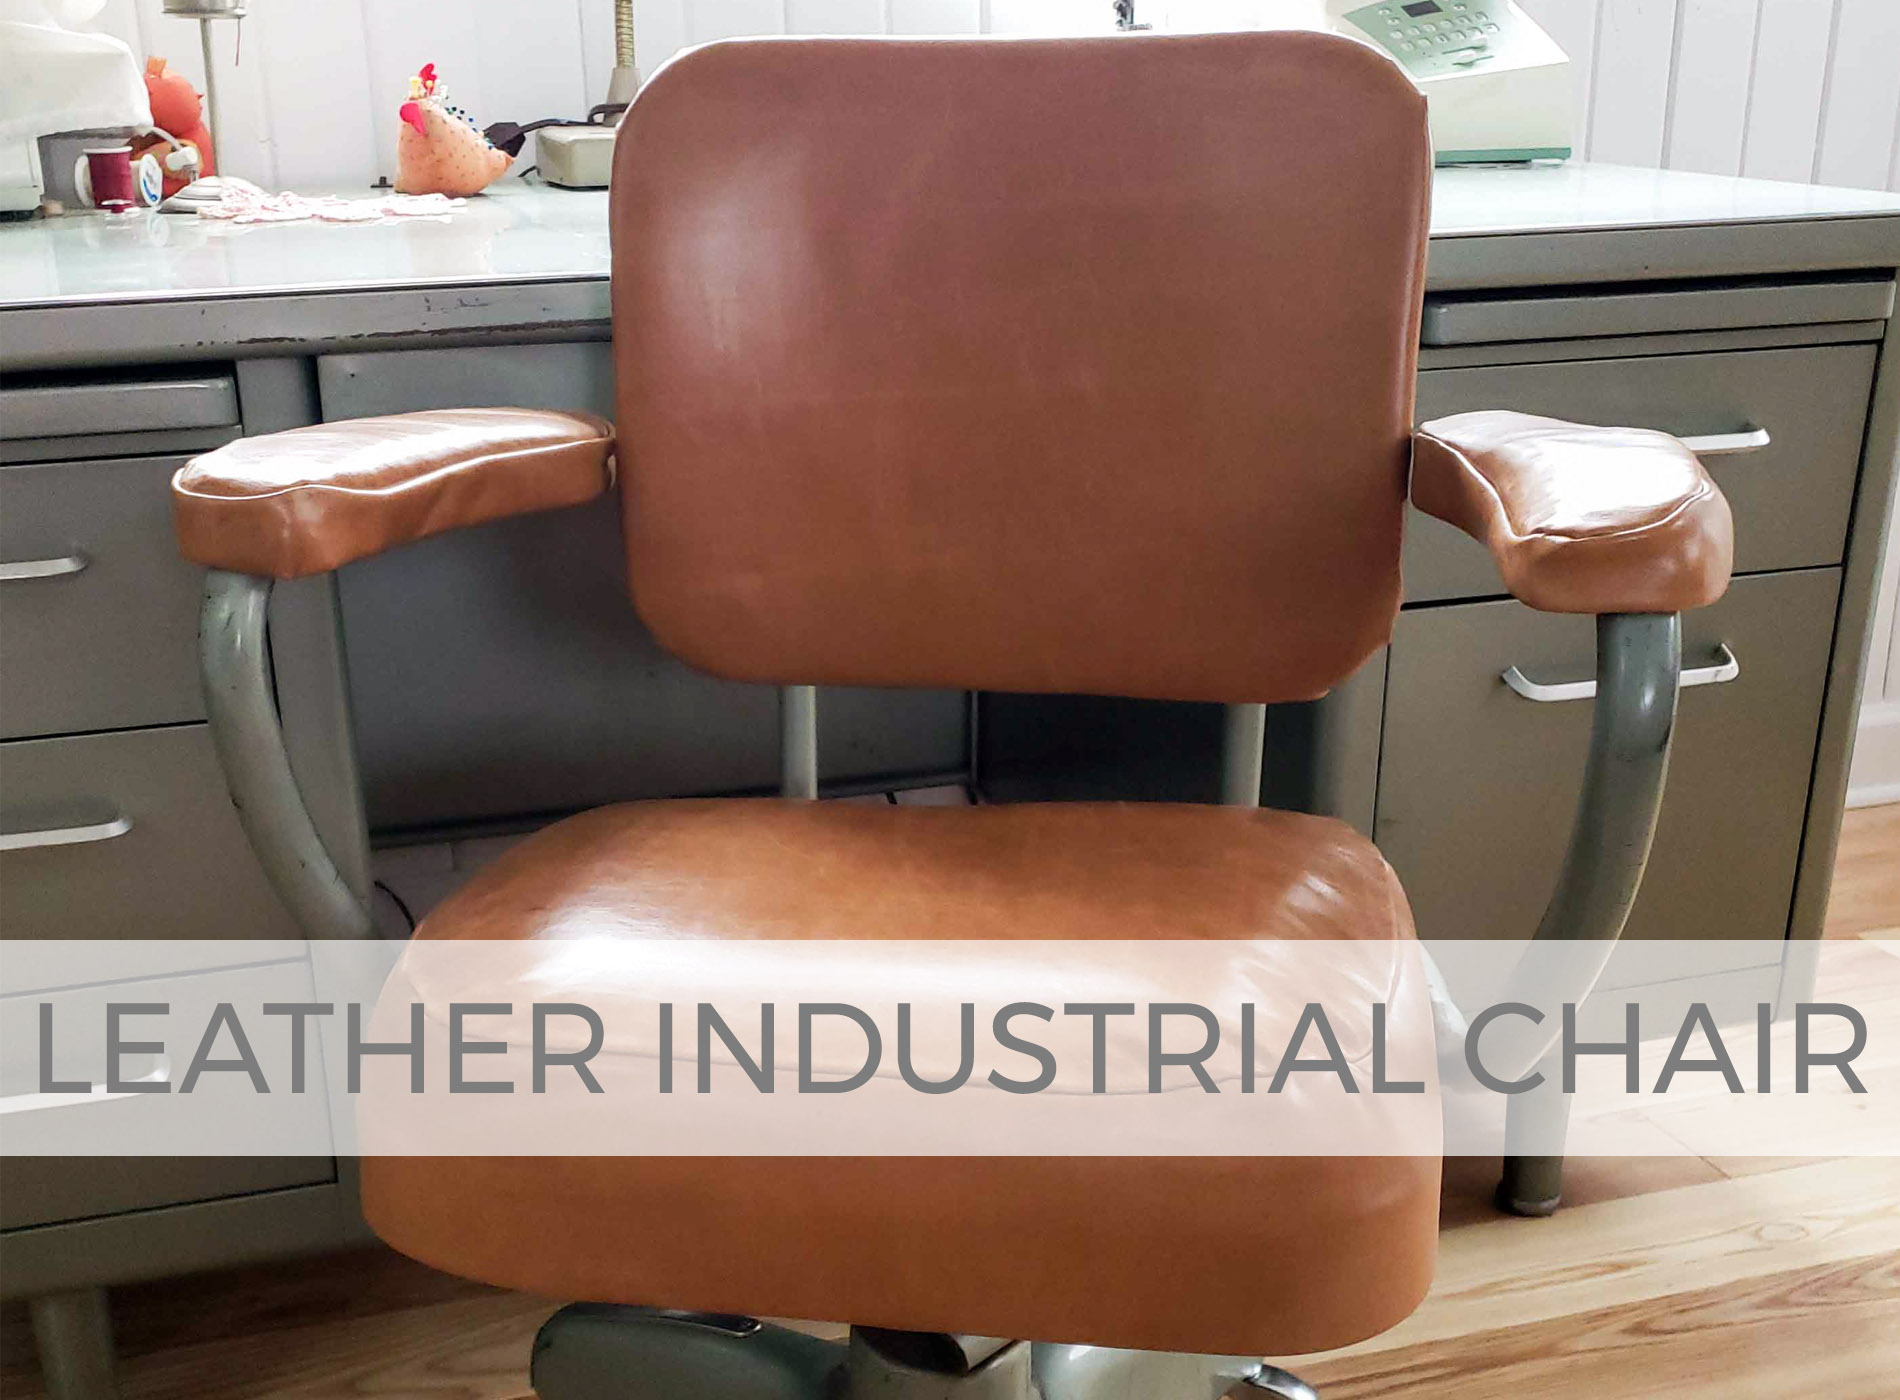 Upholstered Leather Industrial Chair by Larissa of Prodigal Pieces | prodigalpieces.com #prodigalpieces